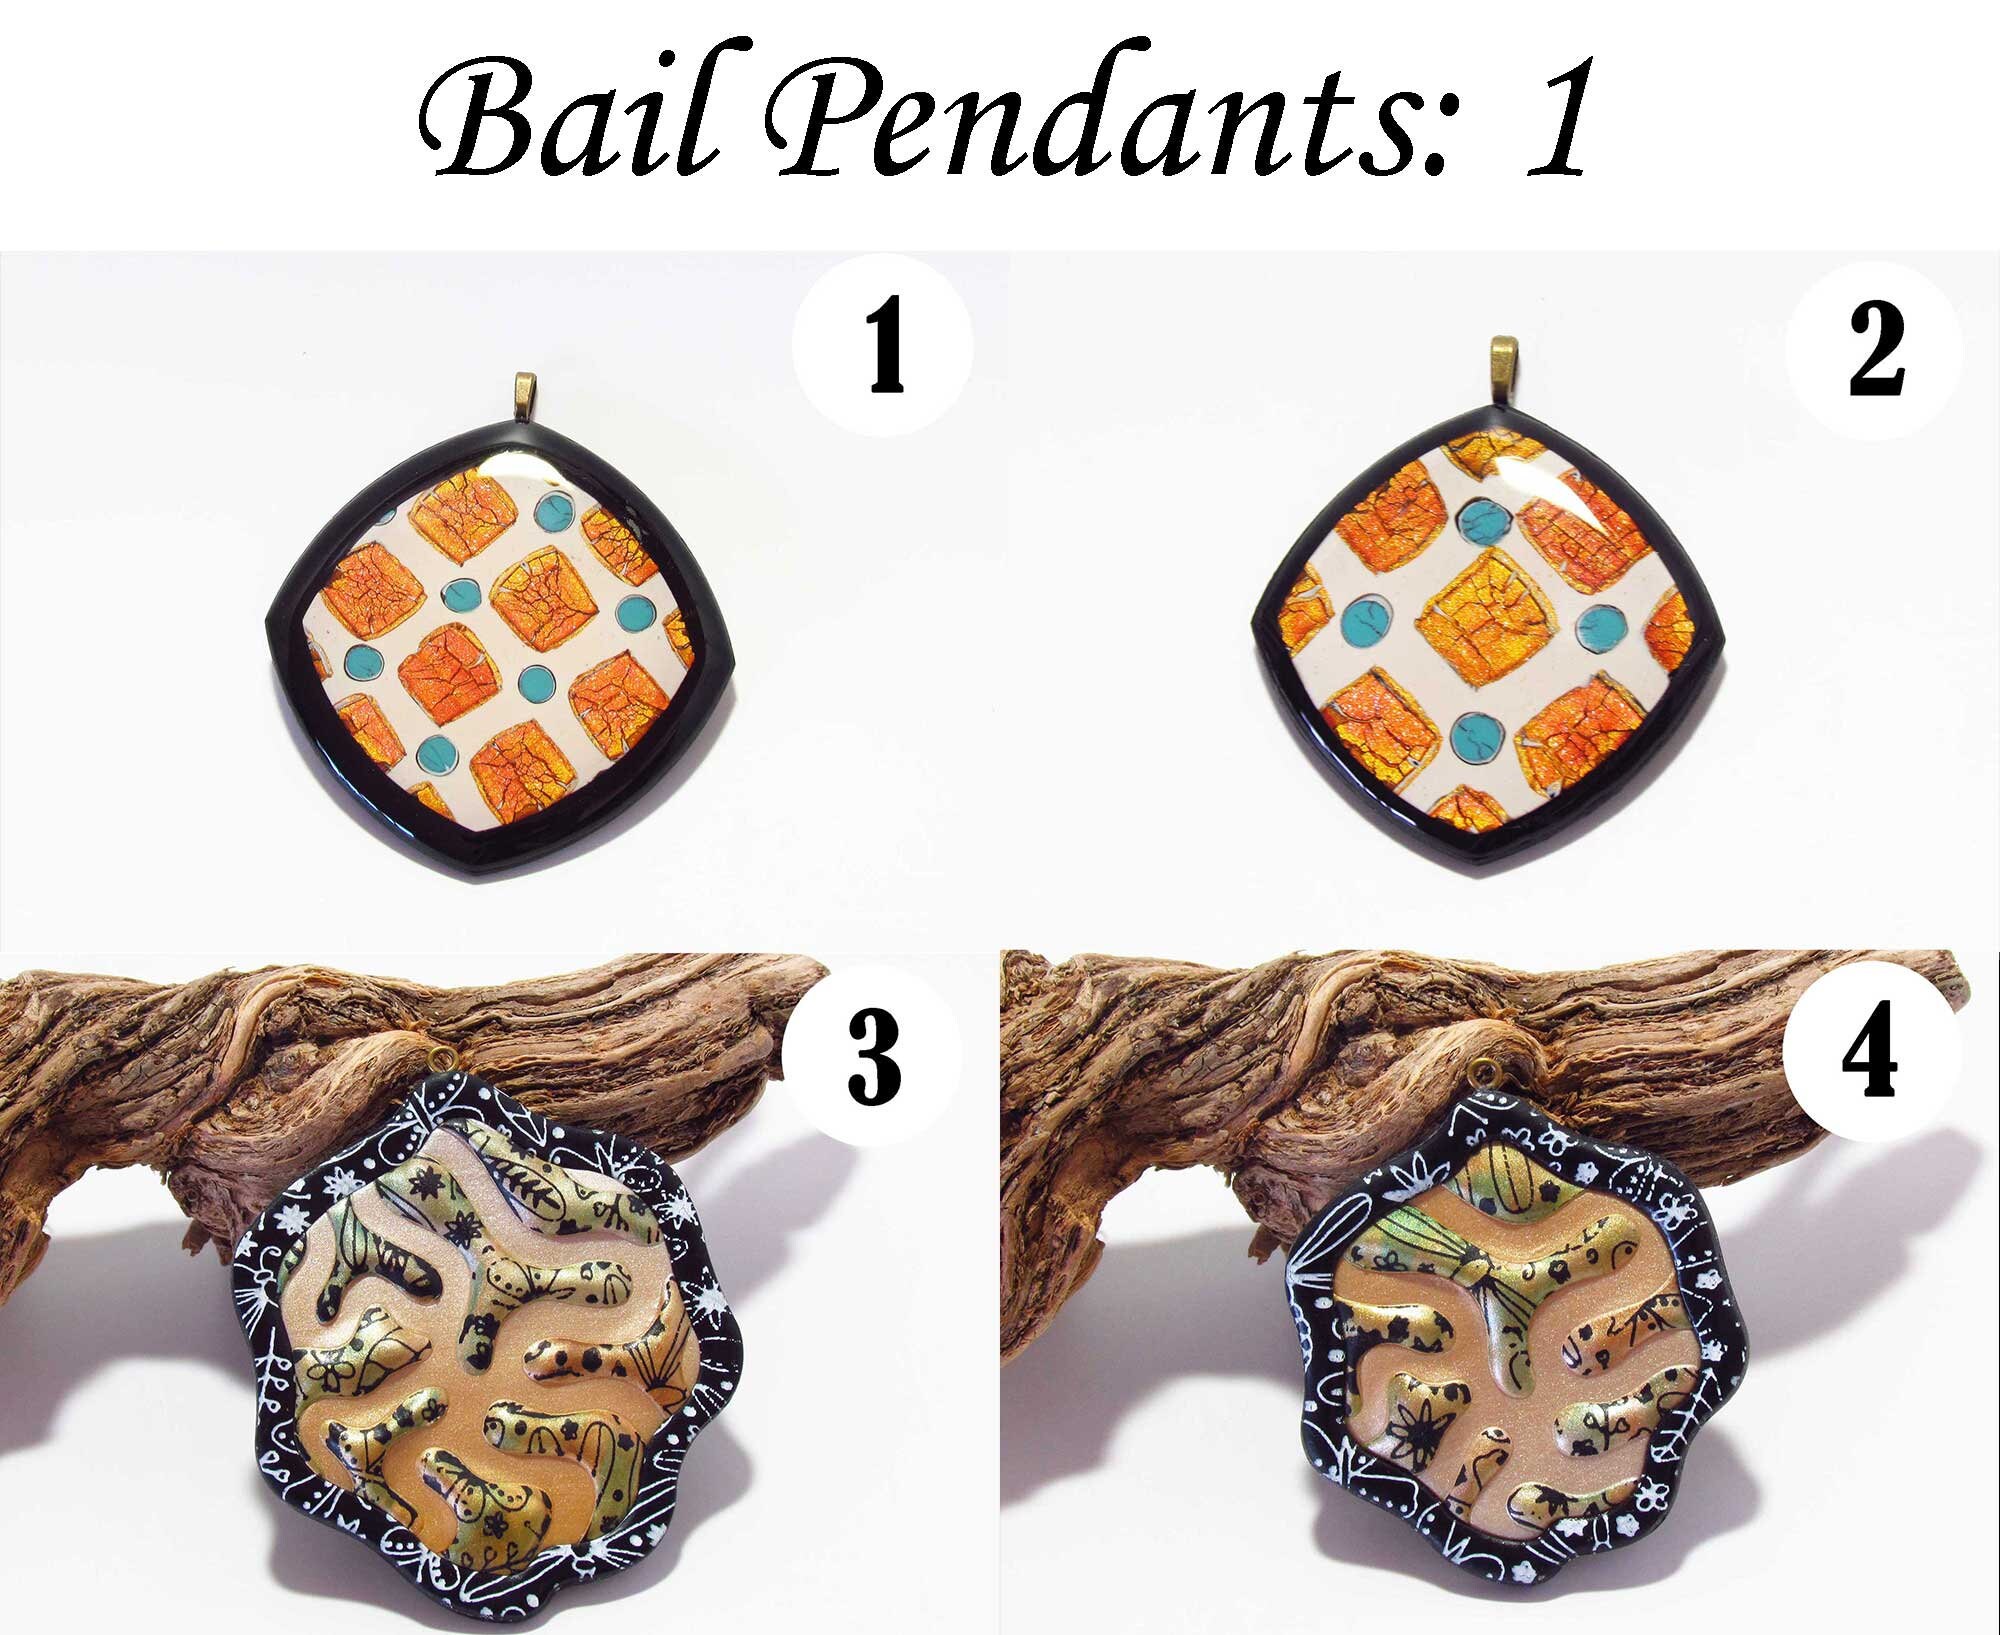 Hollow Beads Polymer Clay Tutorial Learn How to Make Beads in